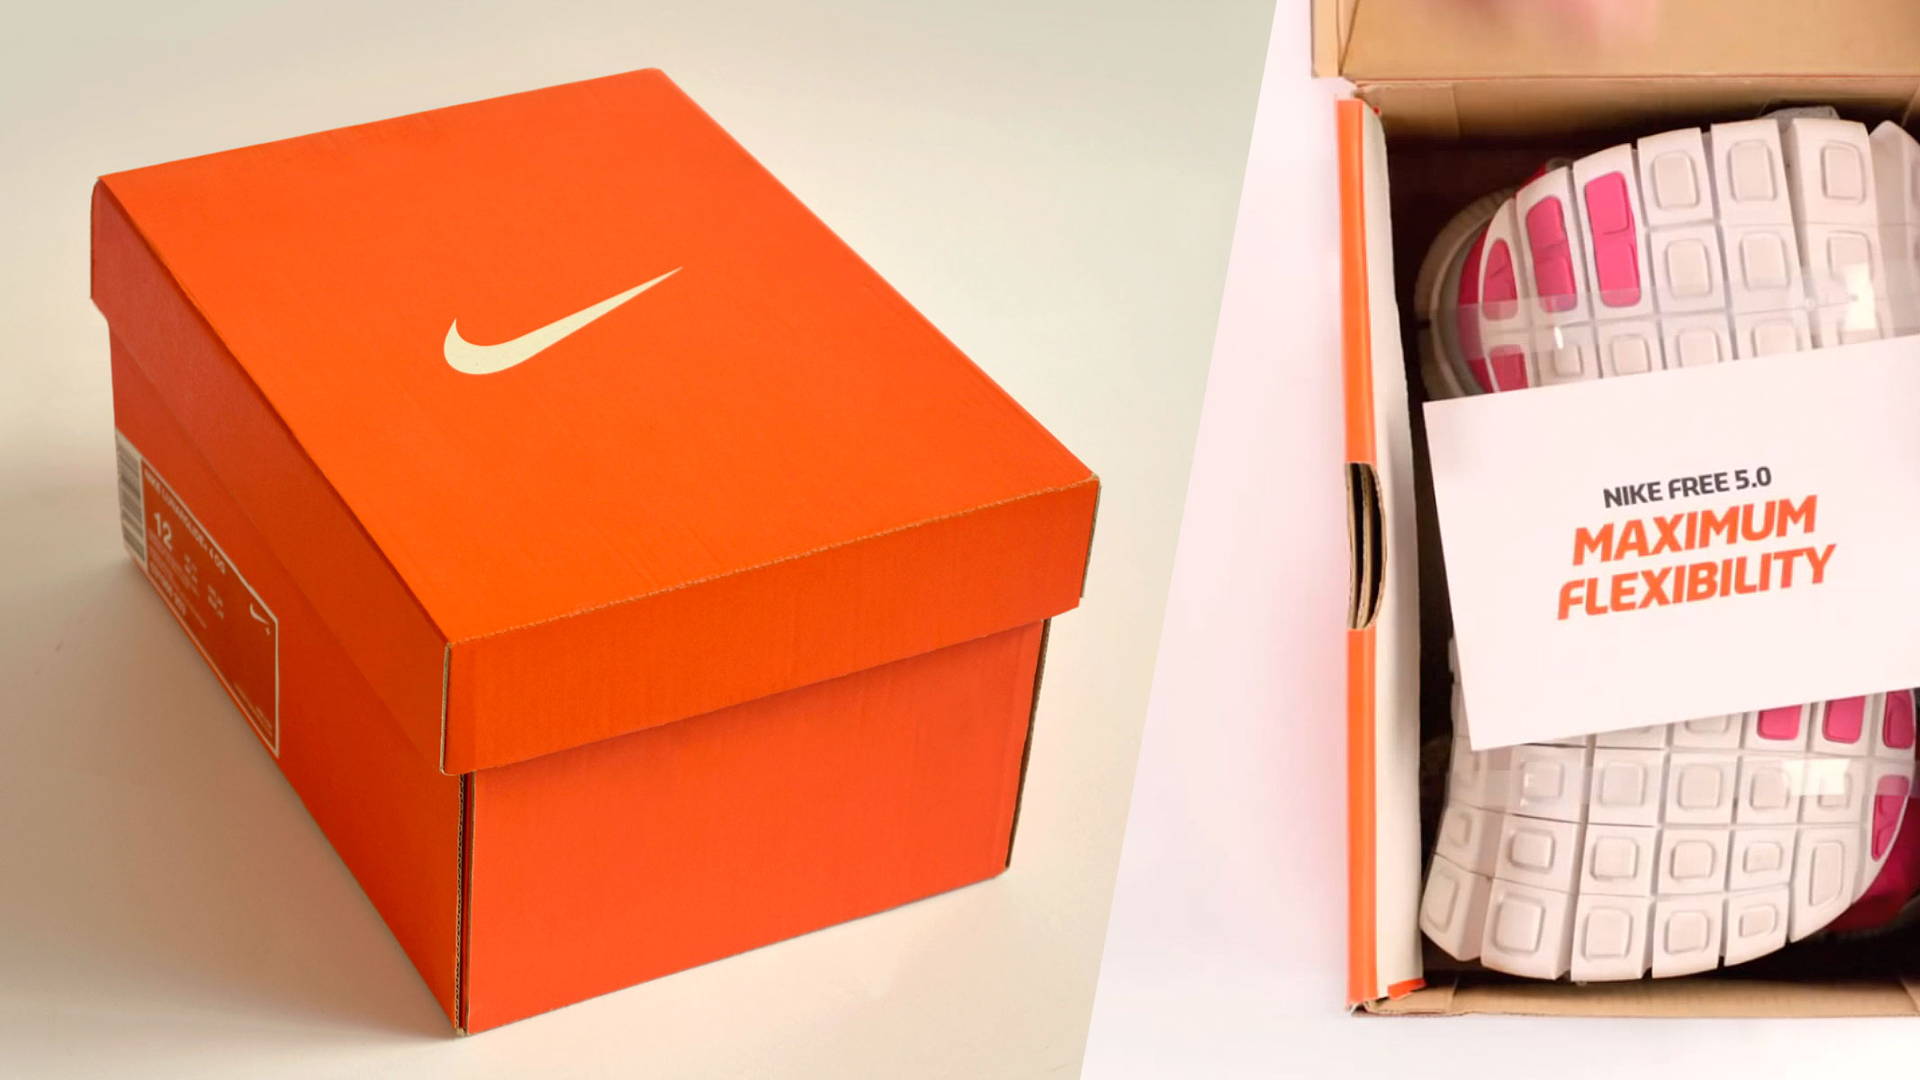 Nike Free Box: A Shoebox 1/3 the Size of the Original | Dieline - Design,  Branding & Packaging Inspiration